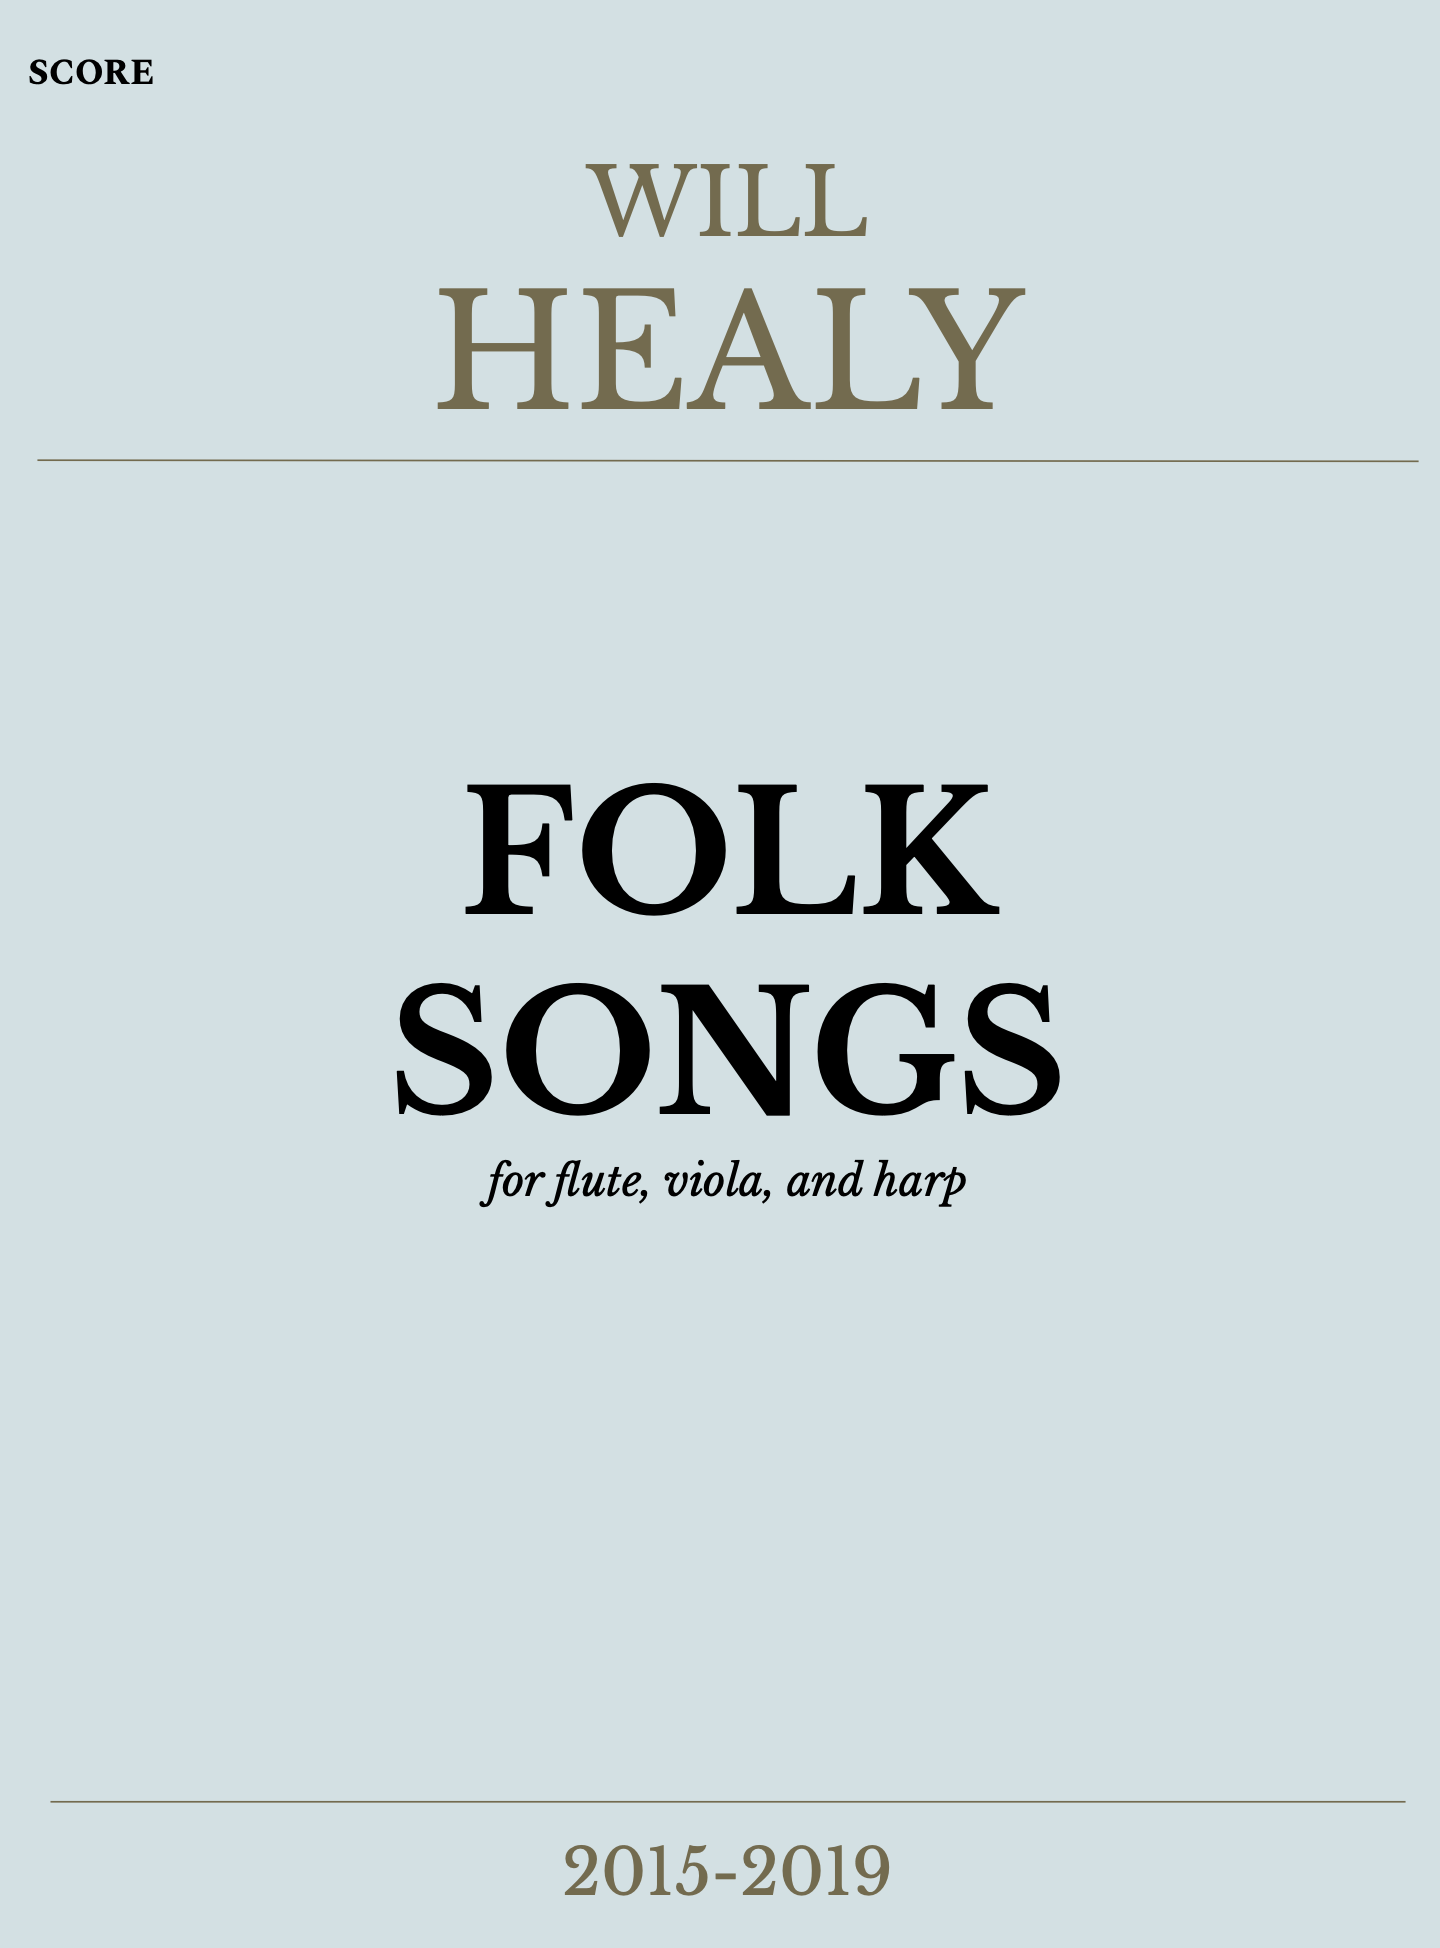 Four Folk Songs (Viola Version) by Will Healy